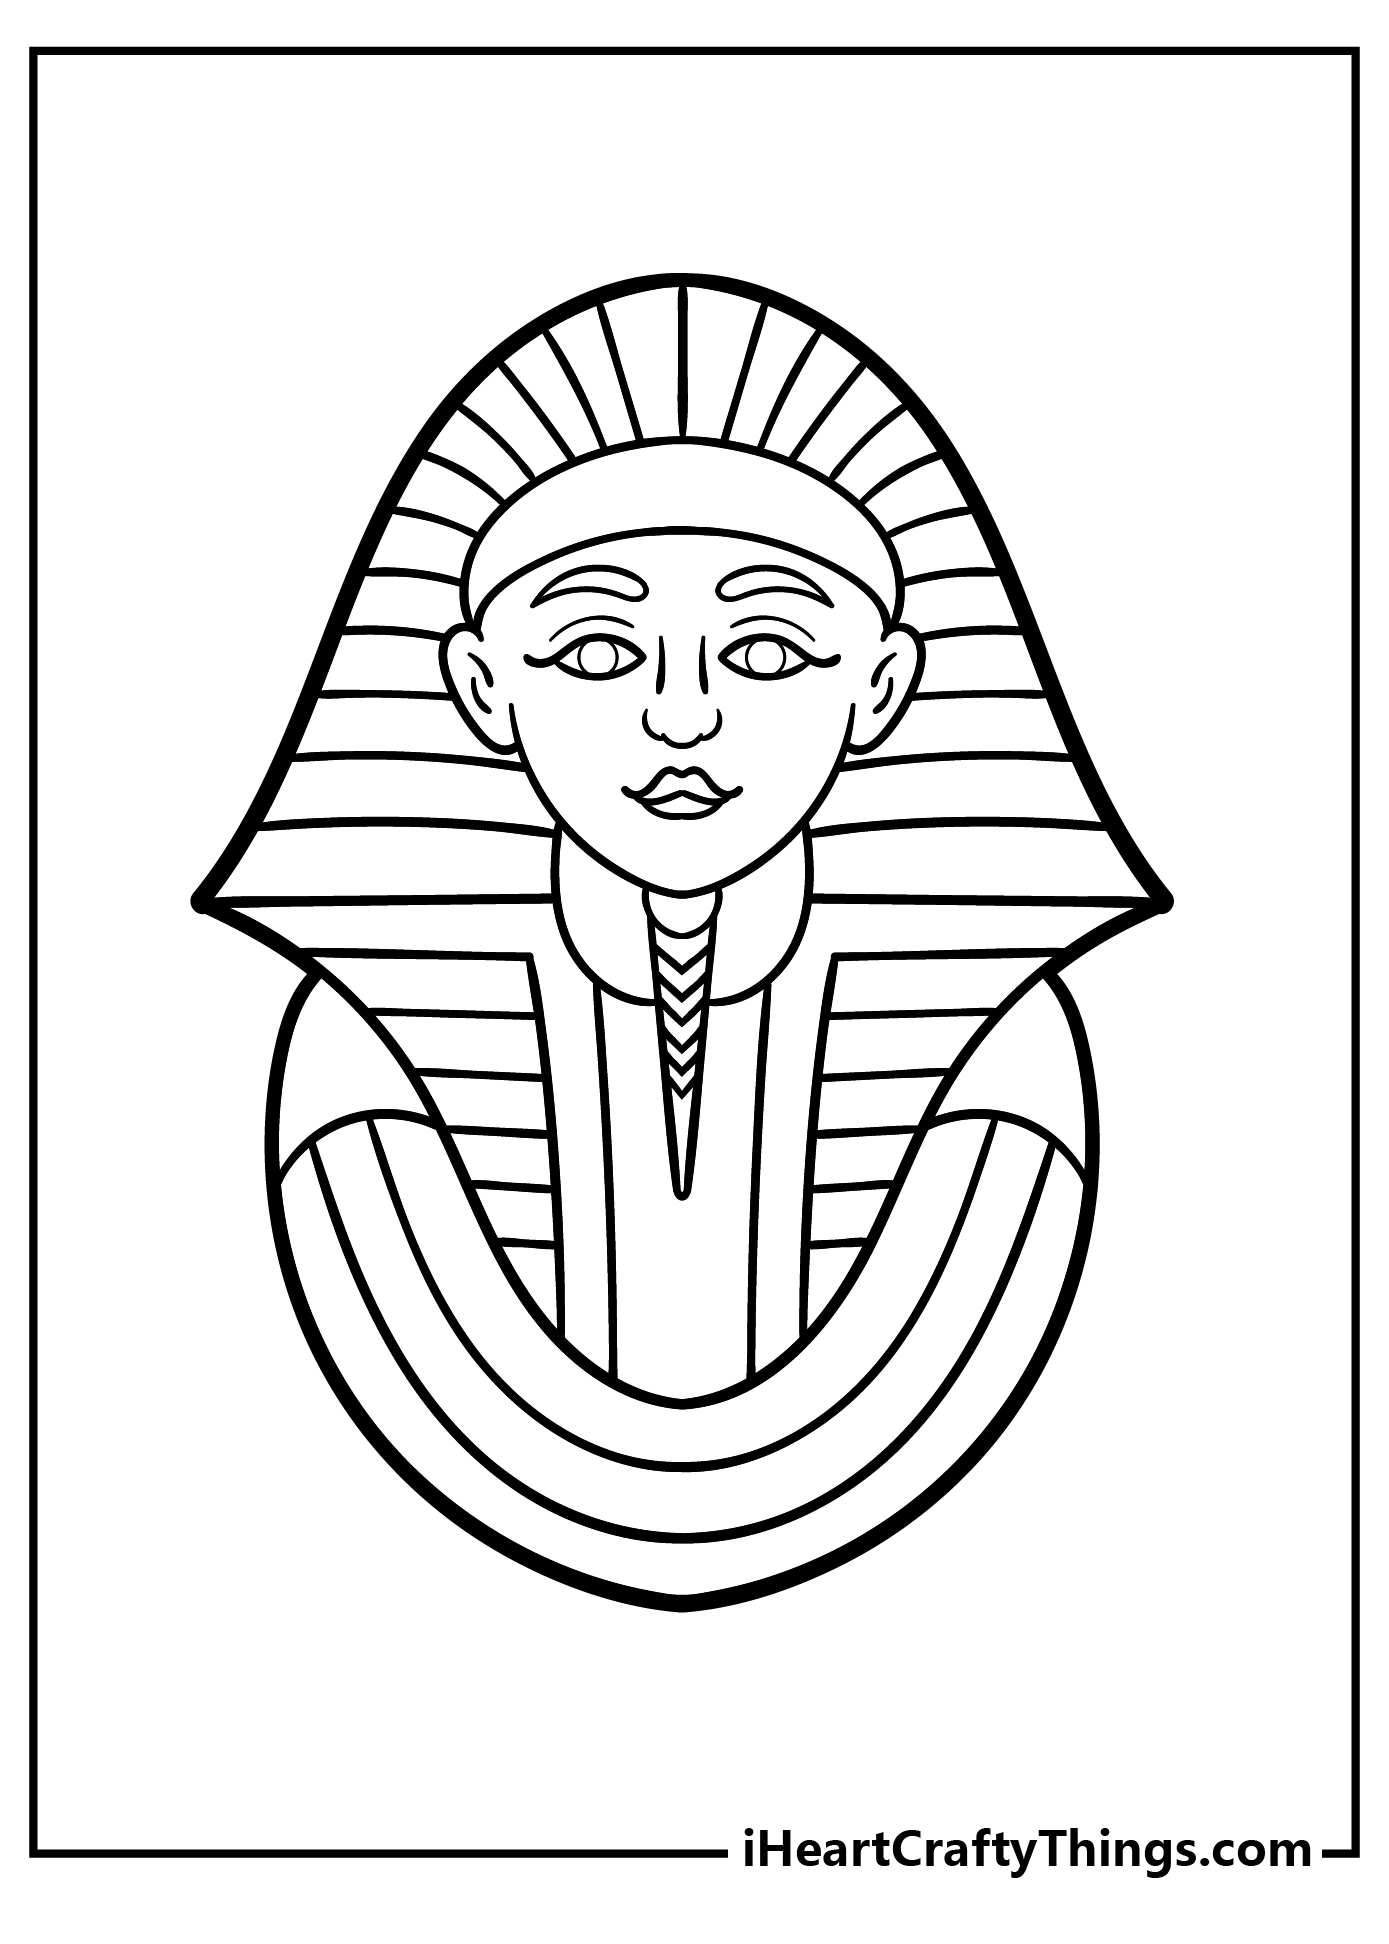 Egyptian Coloring Pages for adults free printable